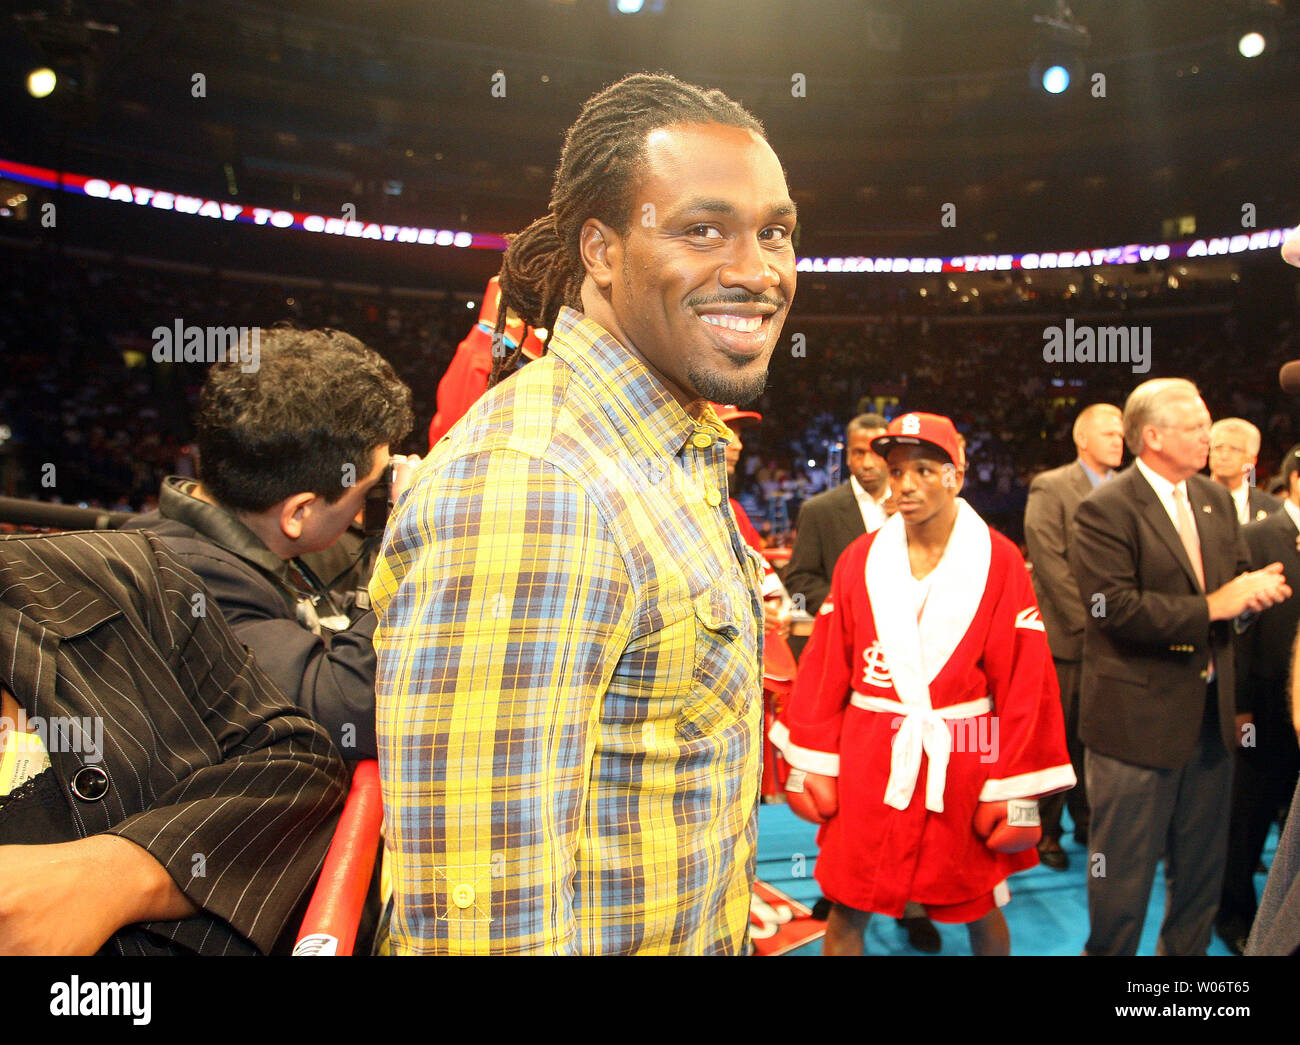 St. Louis Rams running back Stephen Jackson stands in the ring